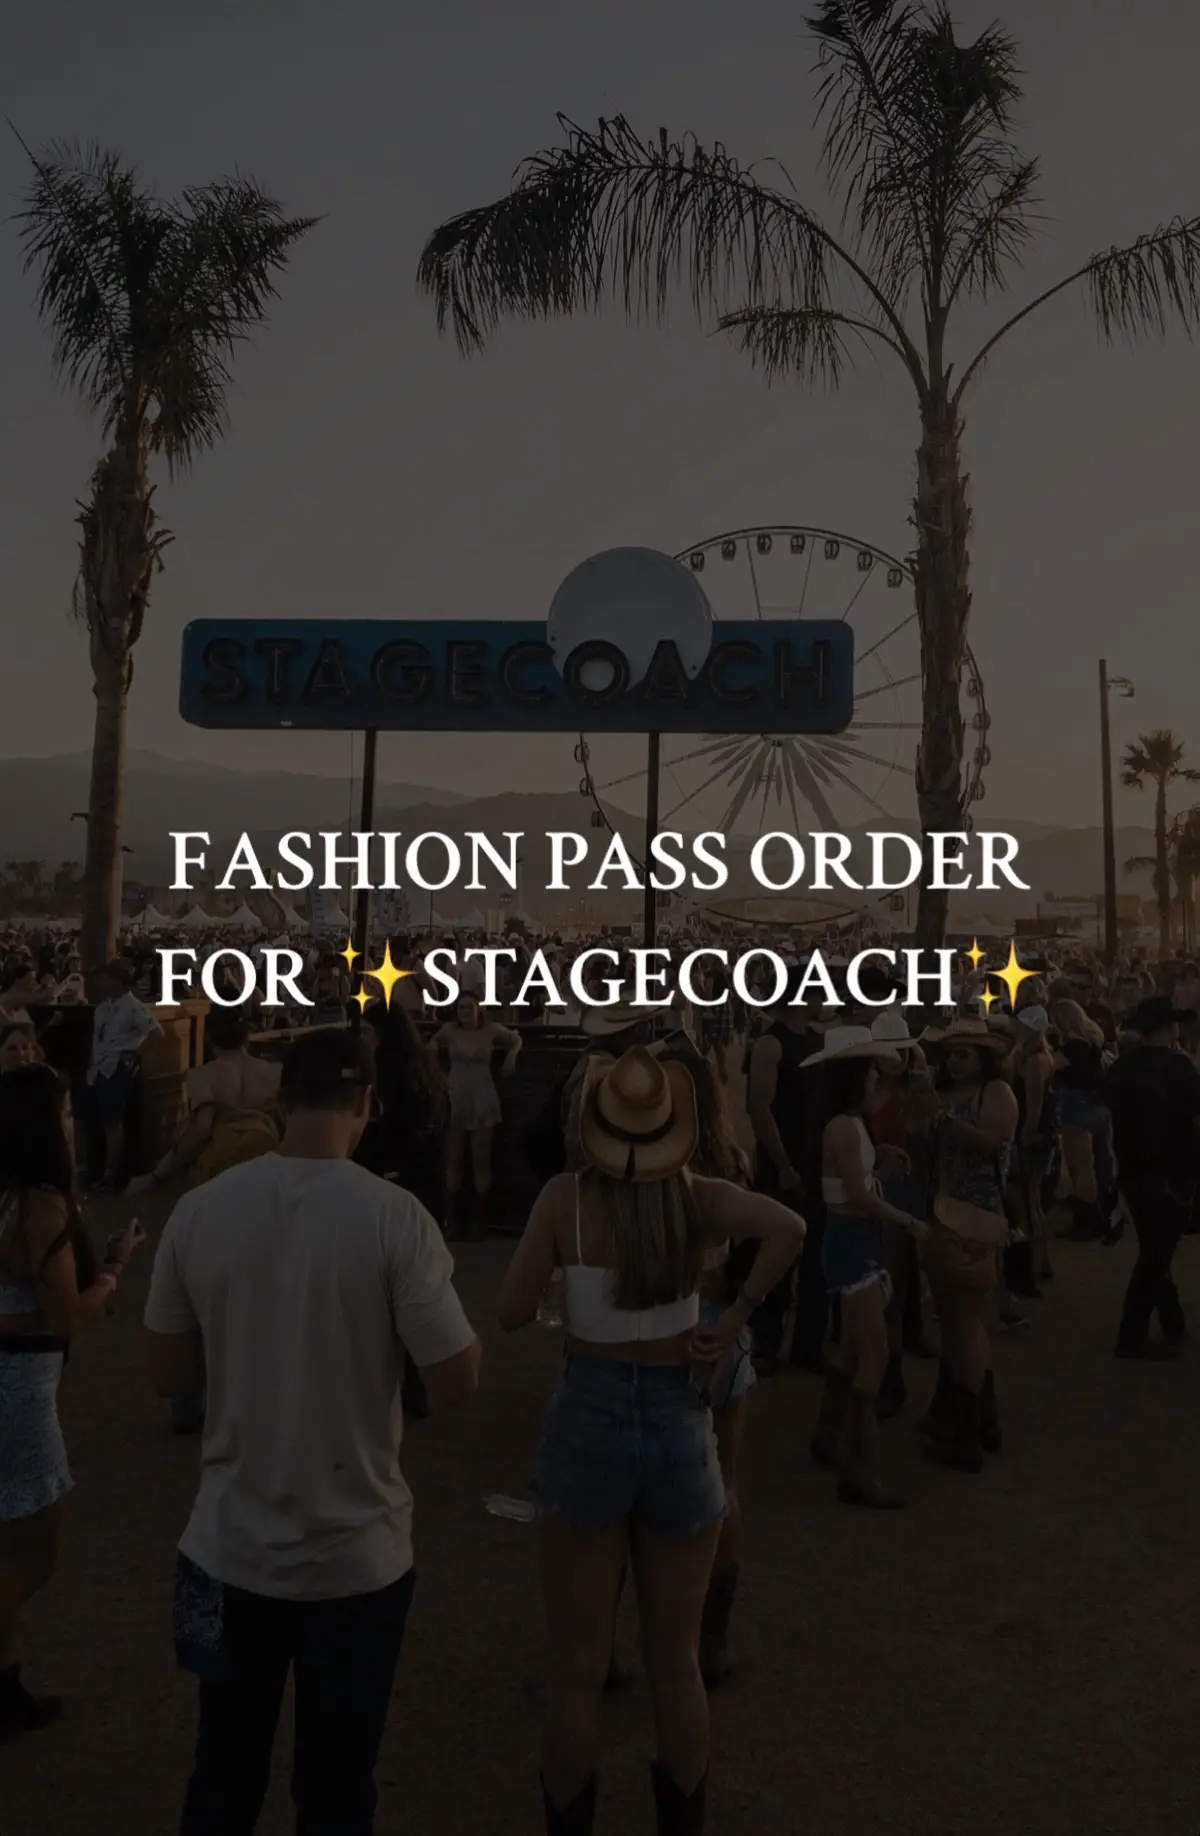 Had to make sure I get a @fashionpass order for stagecoach!! 🤠🍻🌵 #stagecoach #festival #fashionpass #clothingrental 